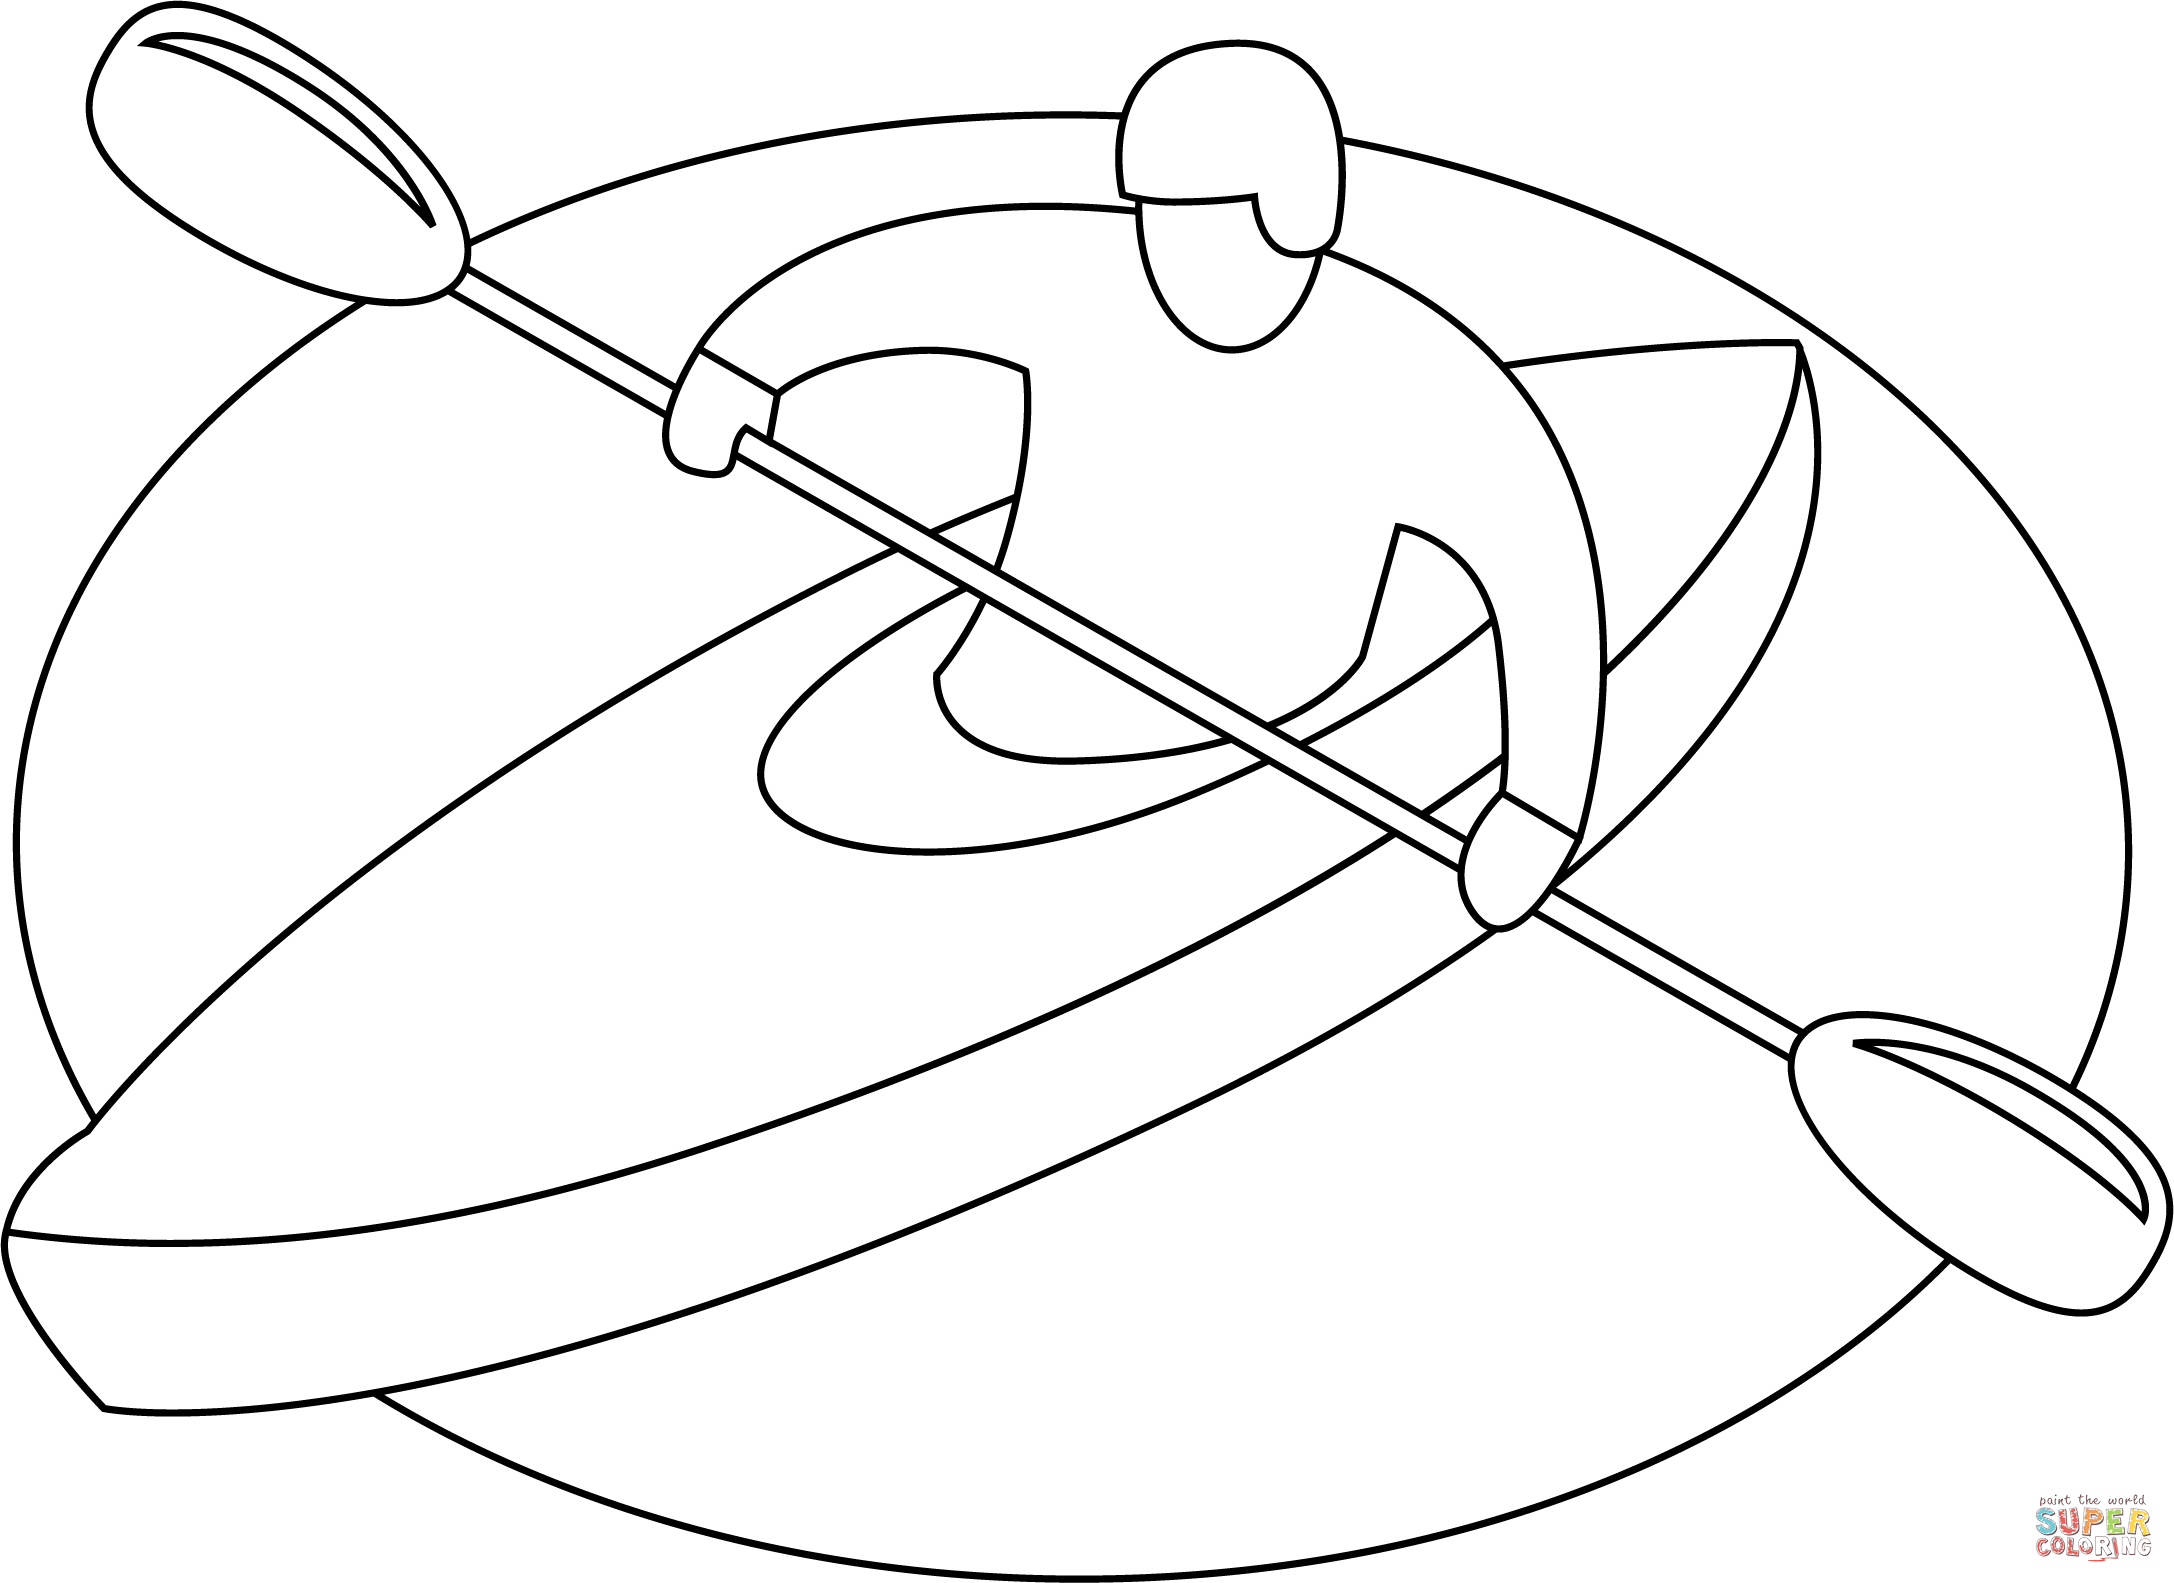 Kayak coloring page | Free Printable Coloring Pages